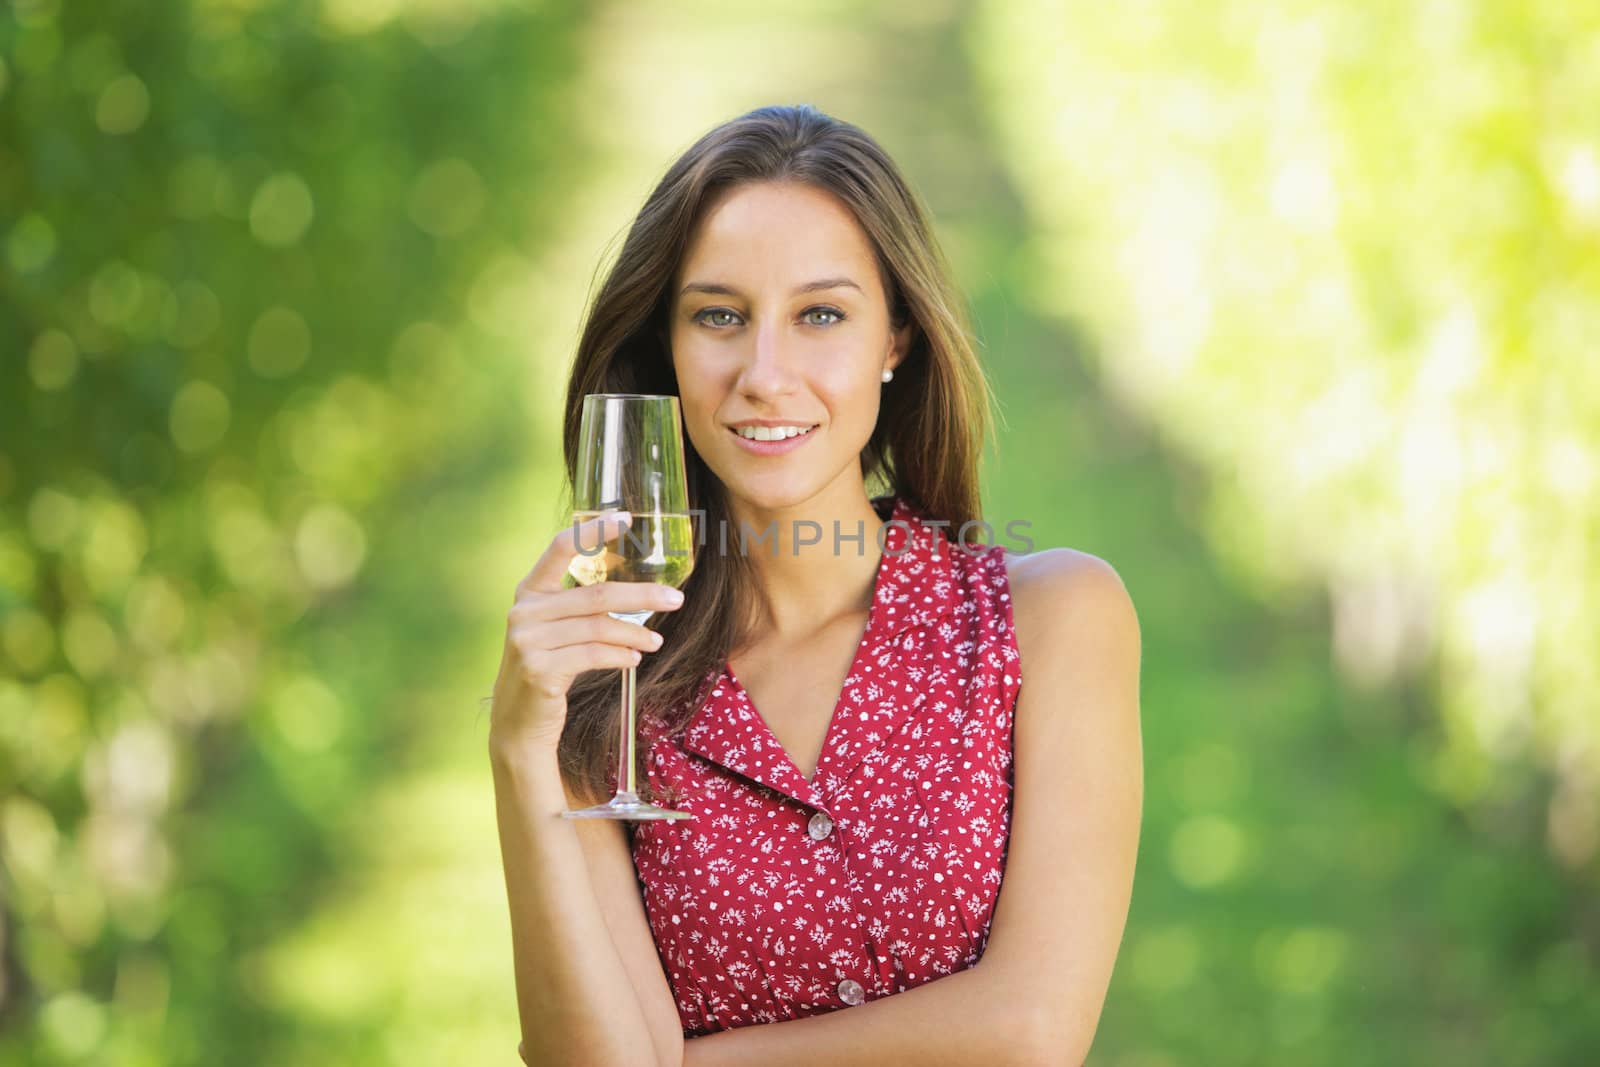 Portrait of woman in vineyard with a glass of champagne